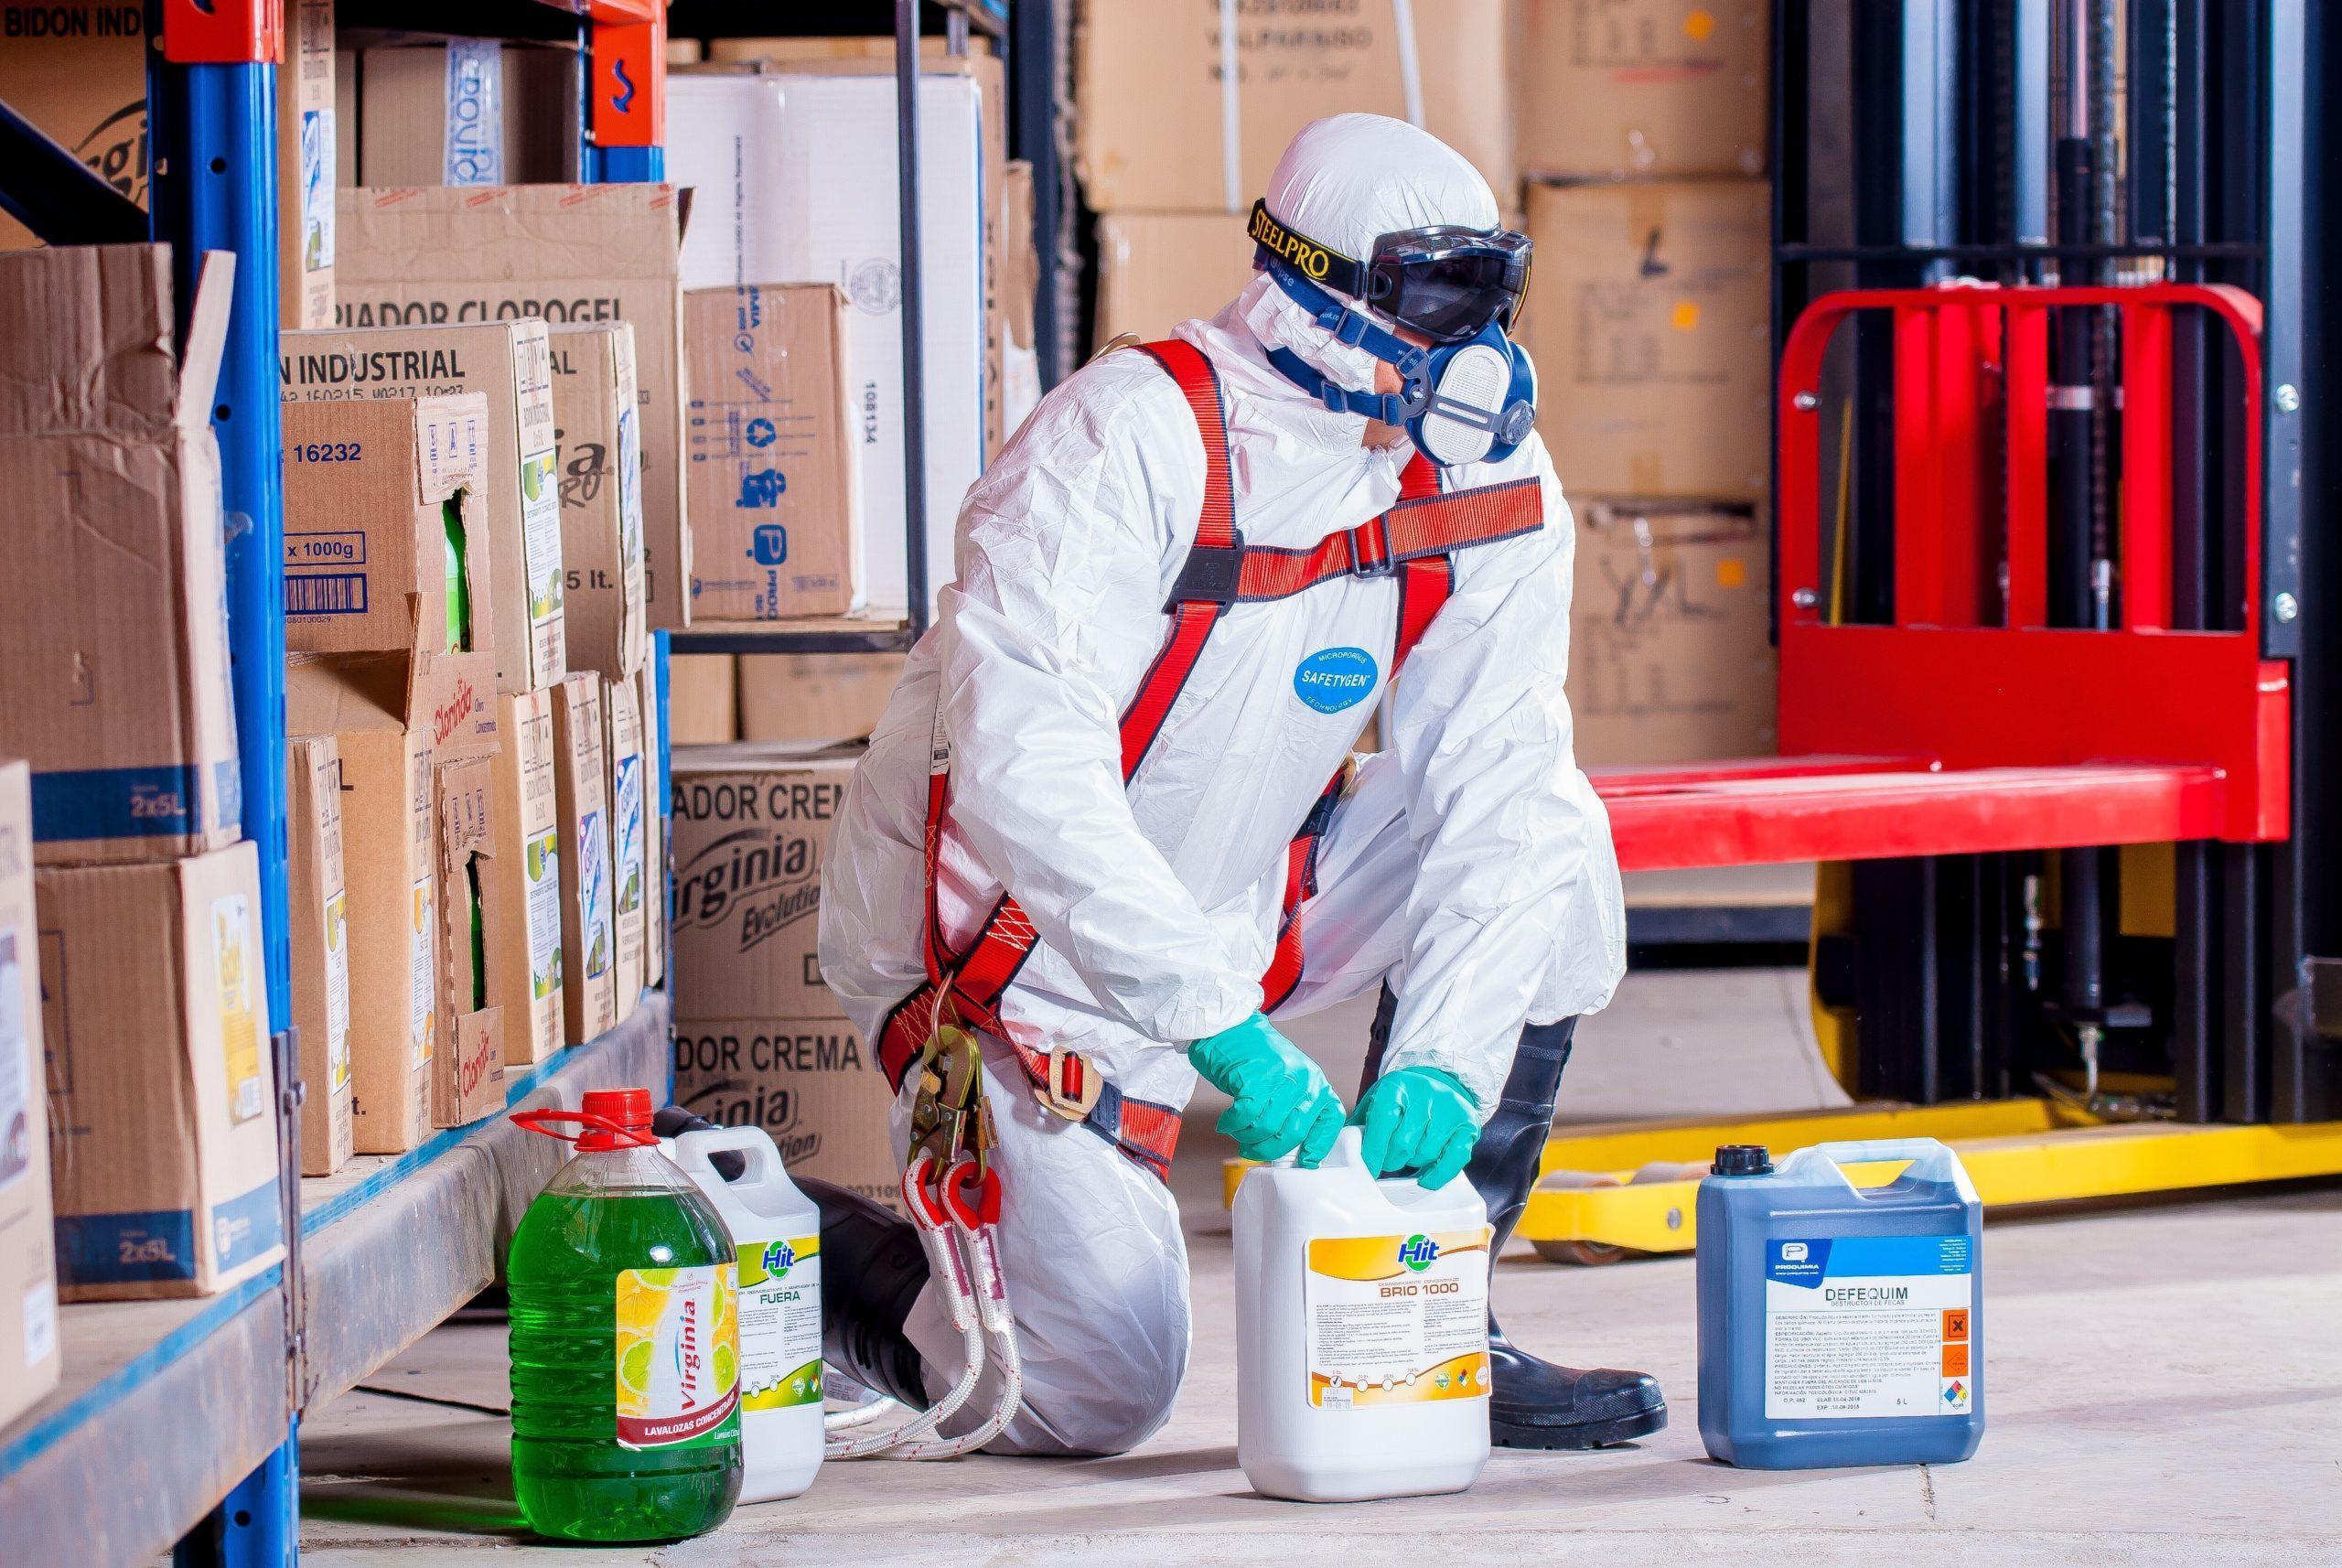 Person wearing a white hazmat suit carrying toxic chemicals in an industrial setting.